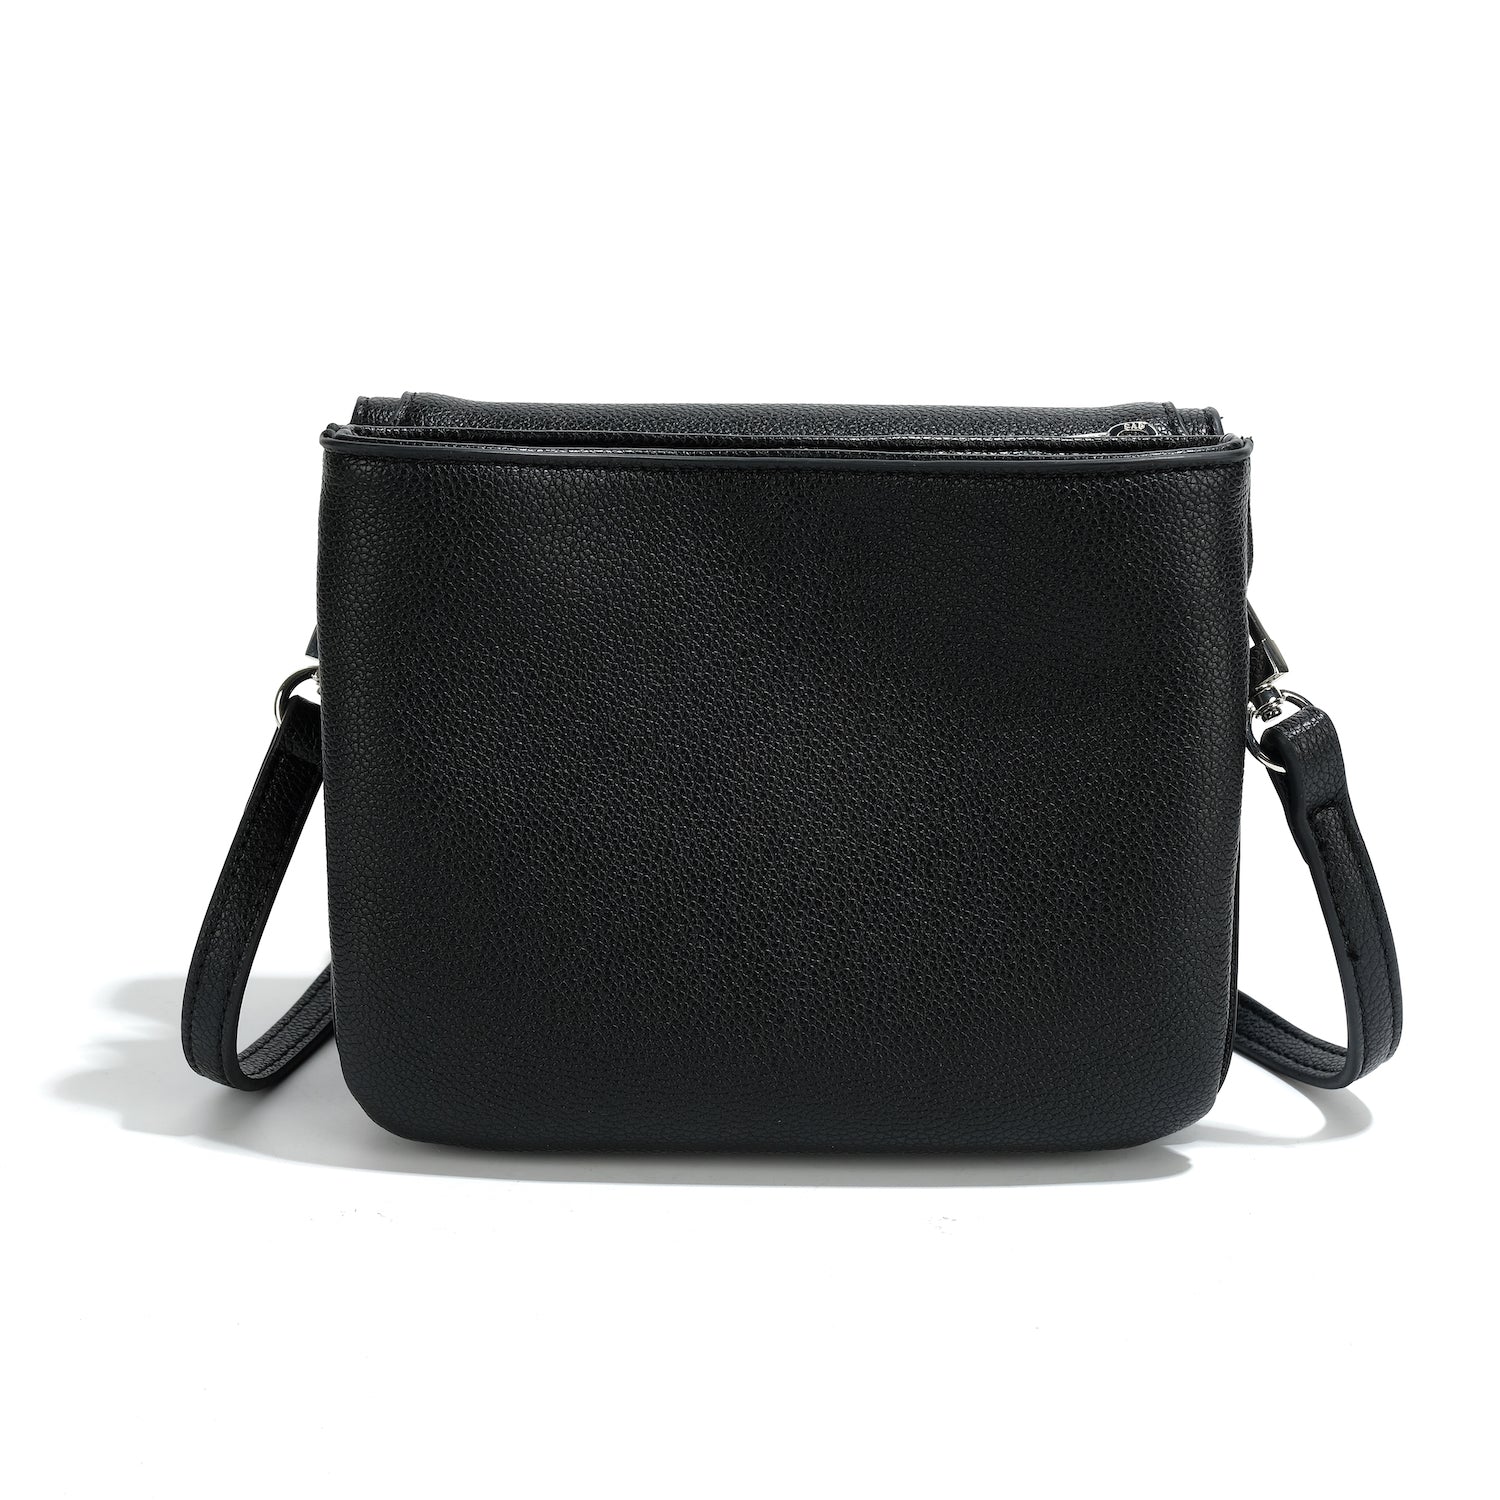 co-lab Wynn Crossbody - Black Accessories - Other Accessories - Handbags & Wallets by co-lab | Grace the Boutique